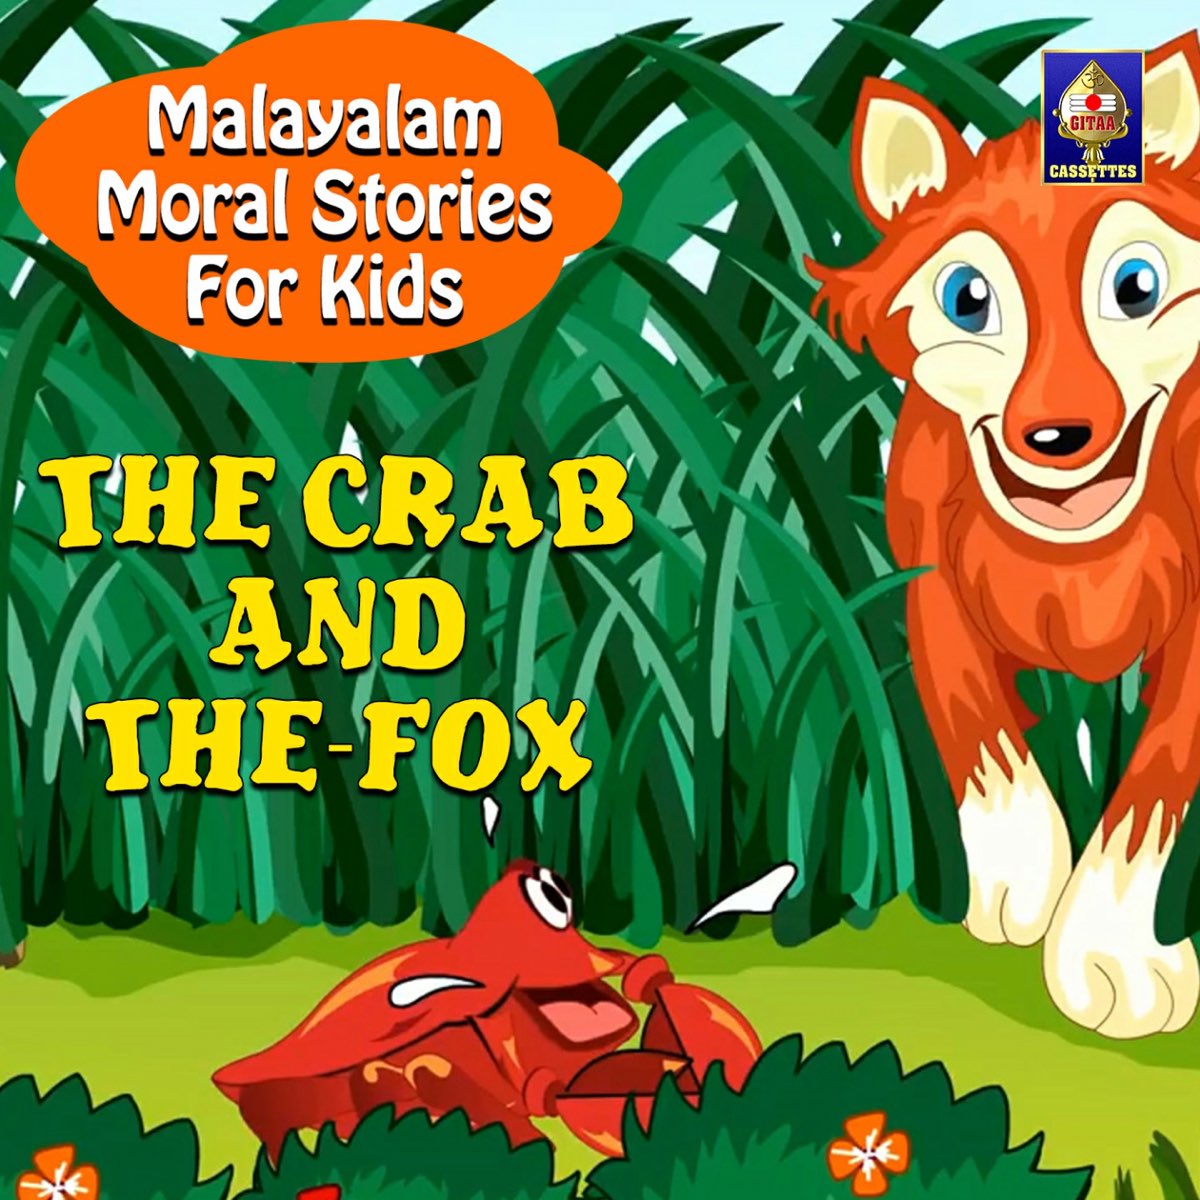 Malayalam Moral Stories For Kids - The Crab and the Fox - Single by  Karthika on Apple Music